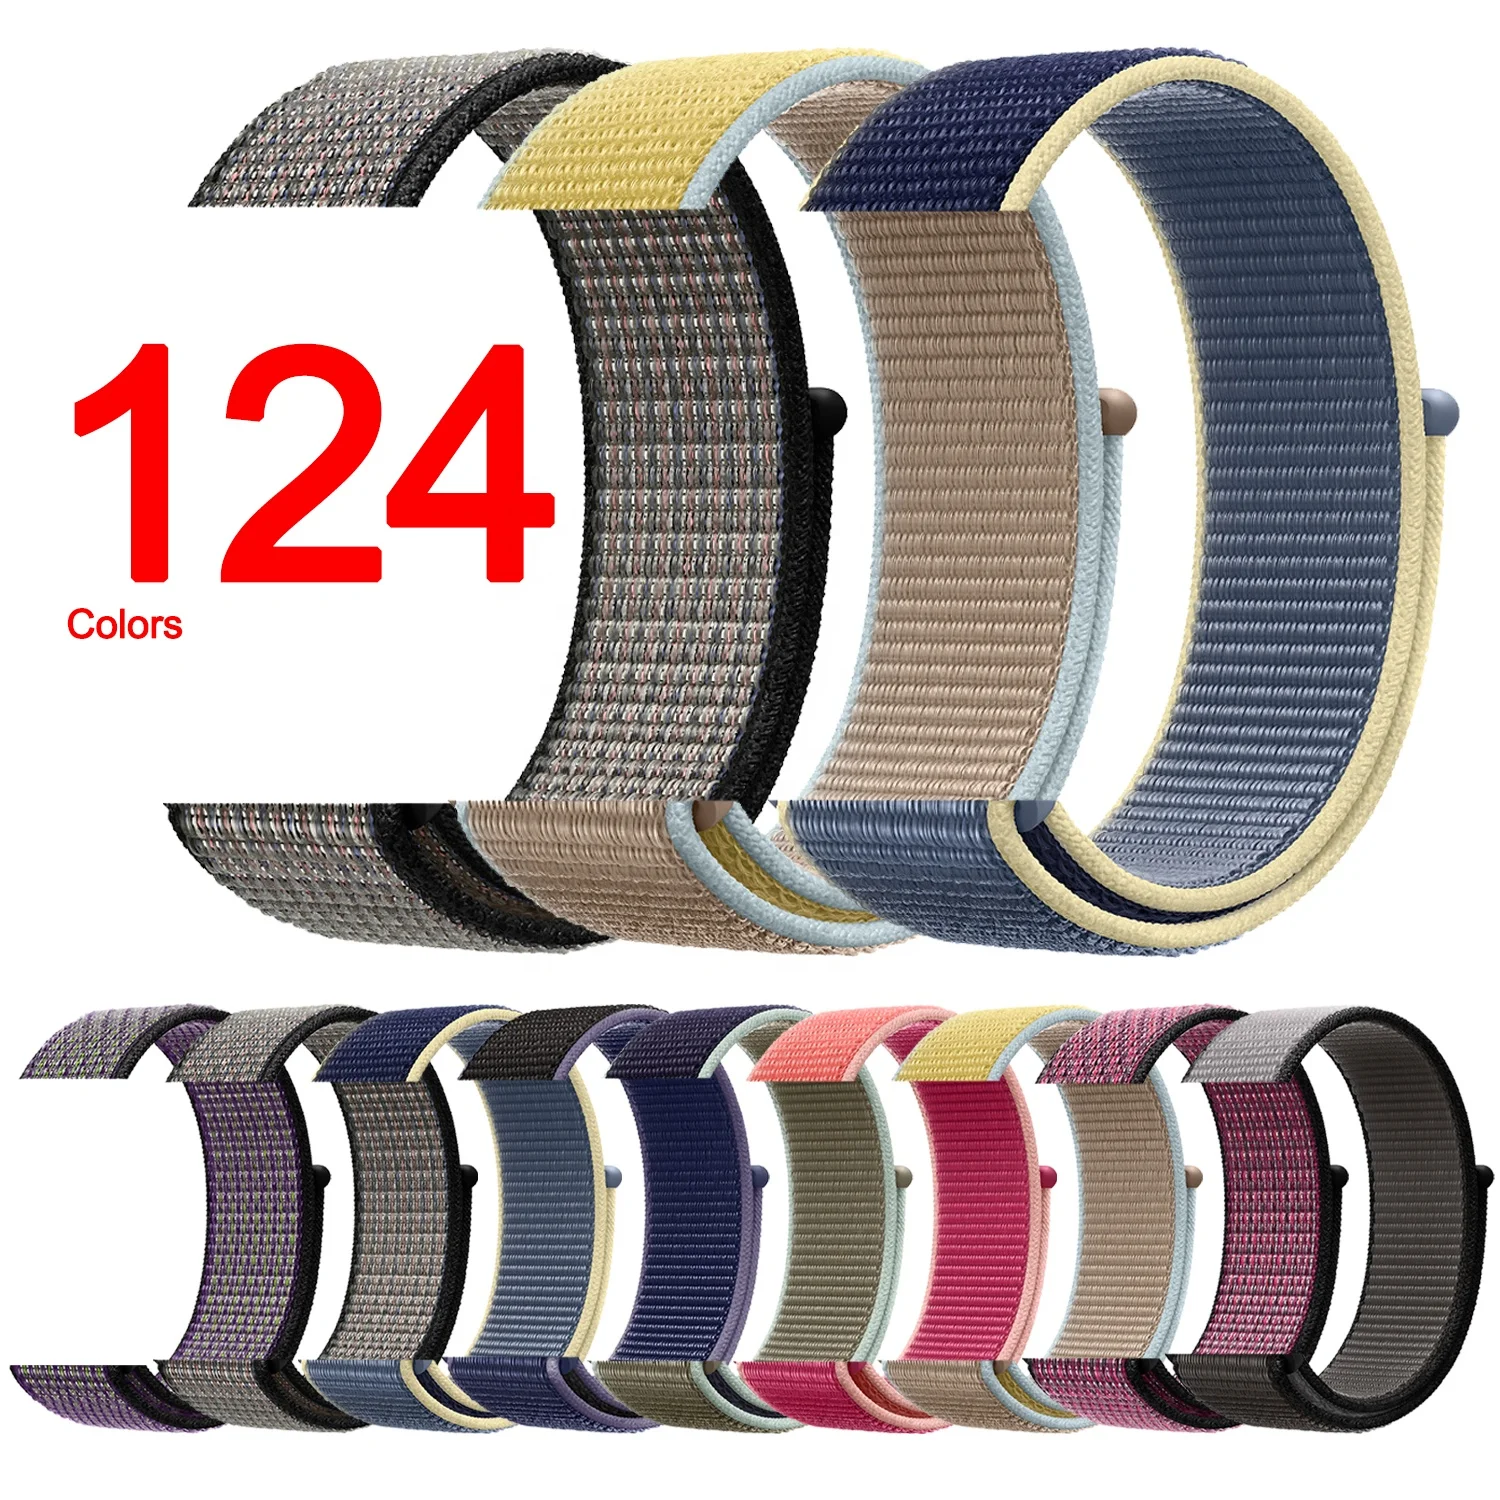 

Tschick Sport Wristbands For Apple Watch Band 38/40mm 42/44mm, Woven Nylon Sport Loop Replacement Strap For iWatch Series 4 3 2, Multi-color optional or customized